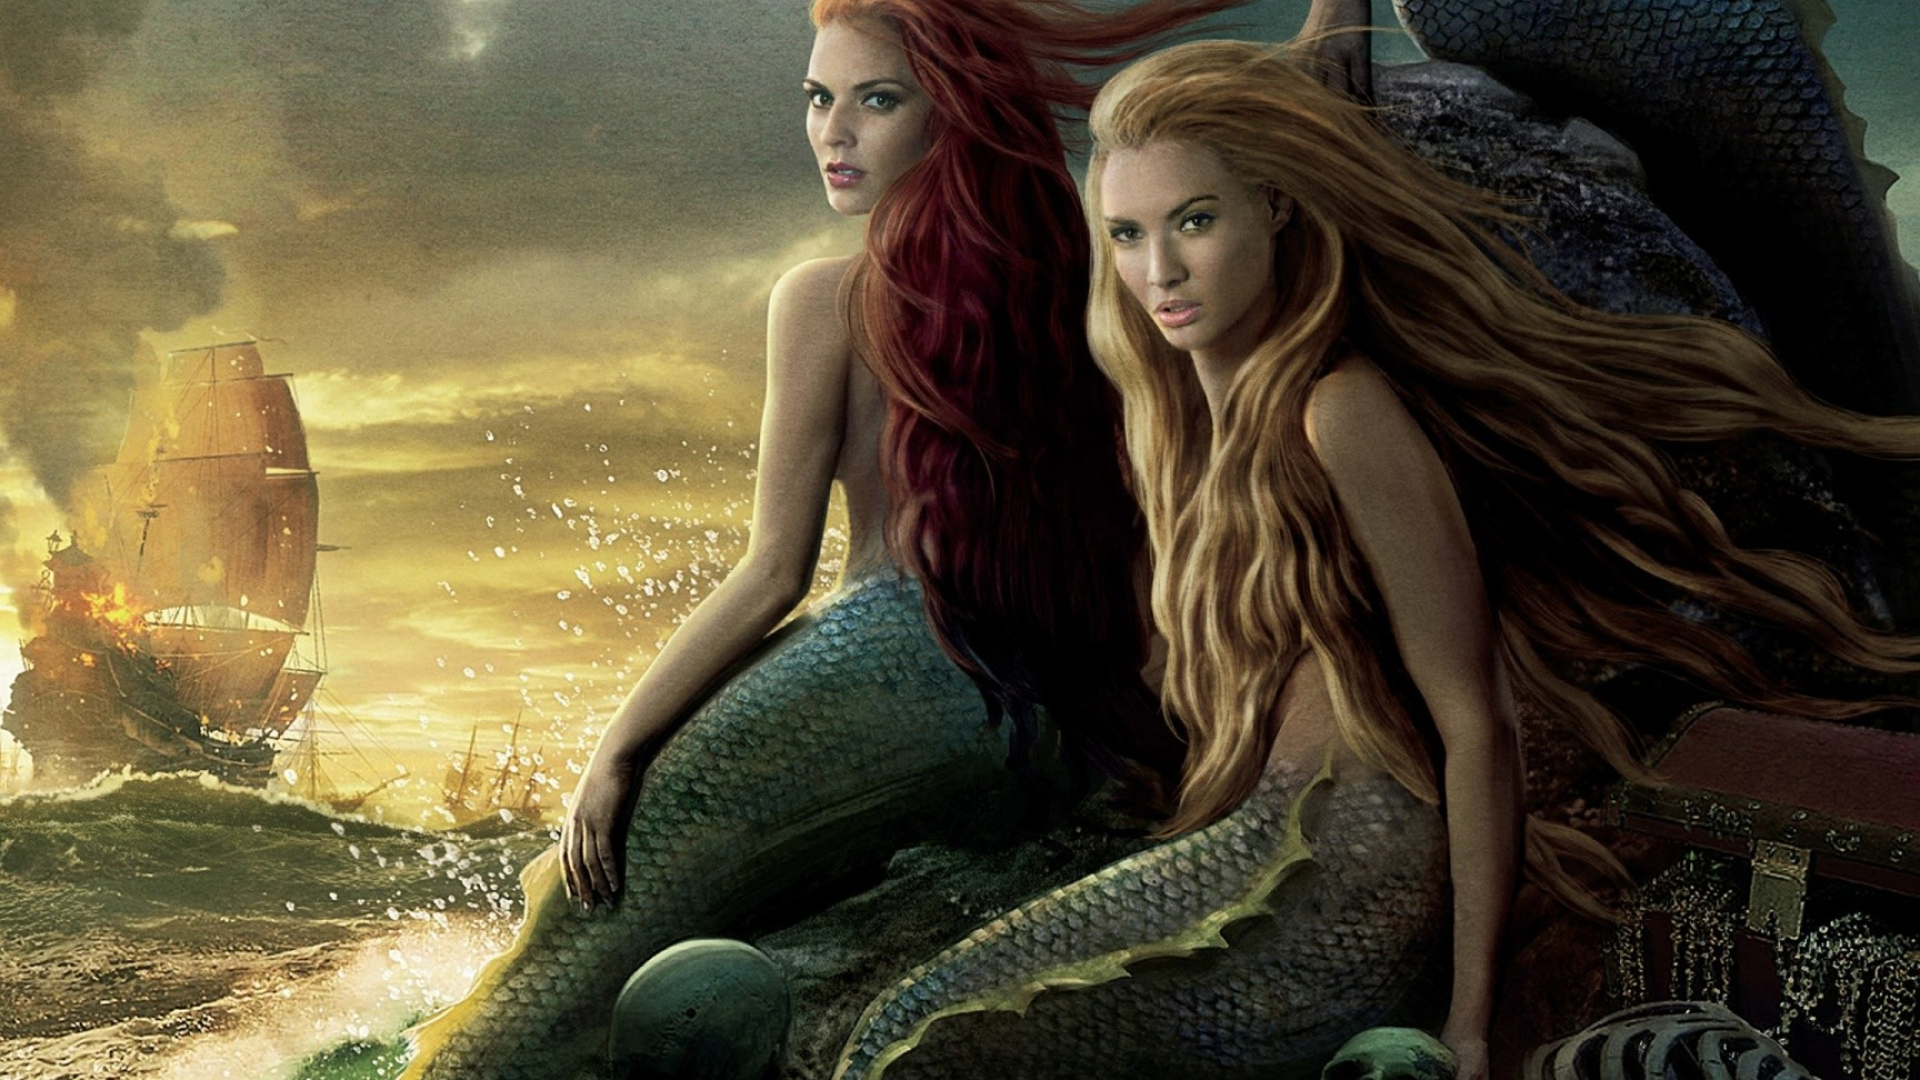 1920x1080 140+ Mermaid HD Wallpapers and Backgrounds